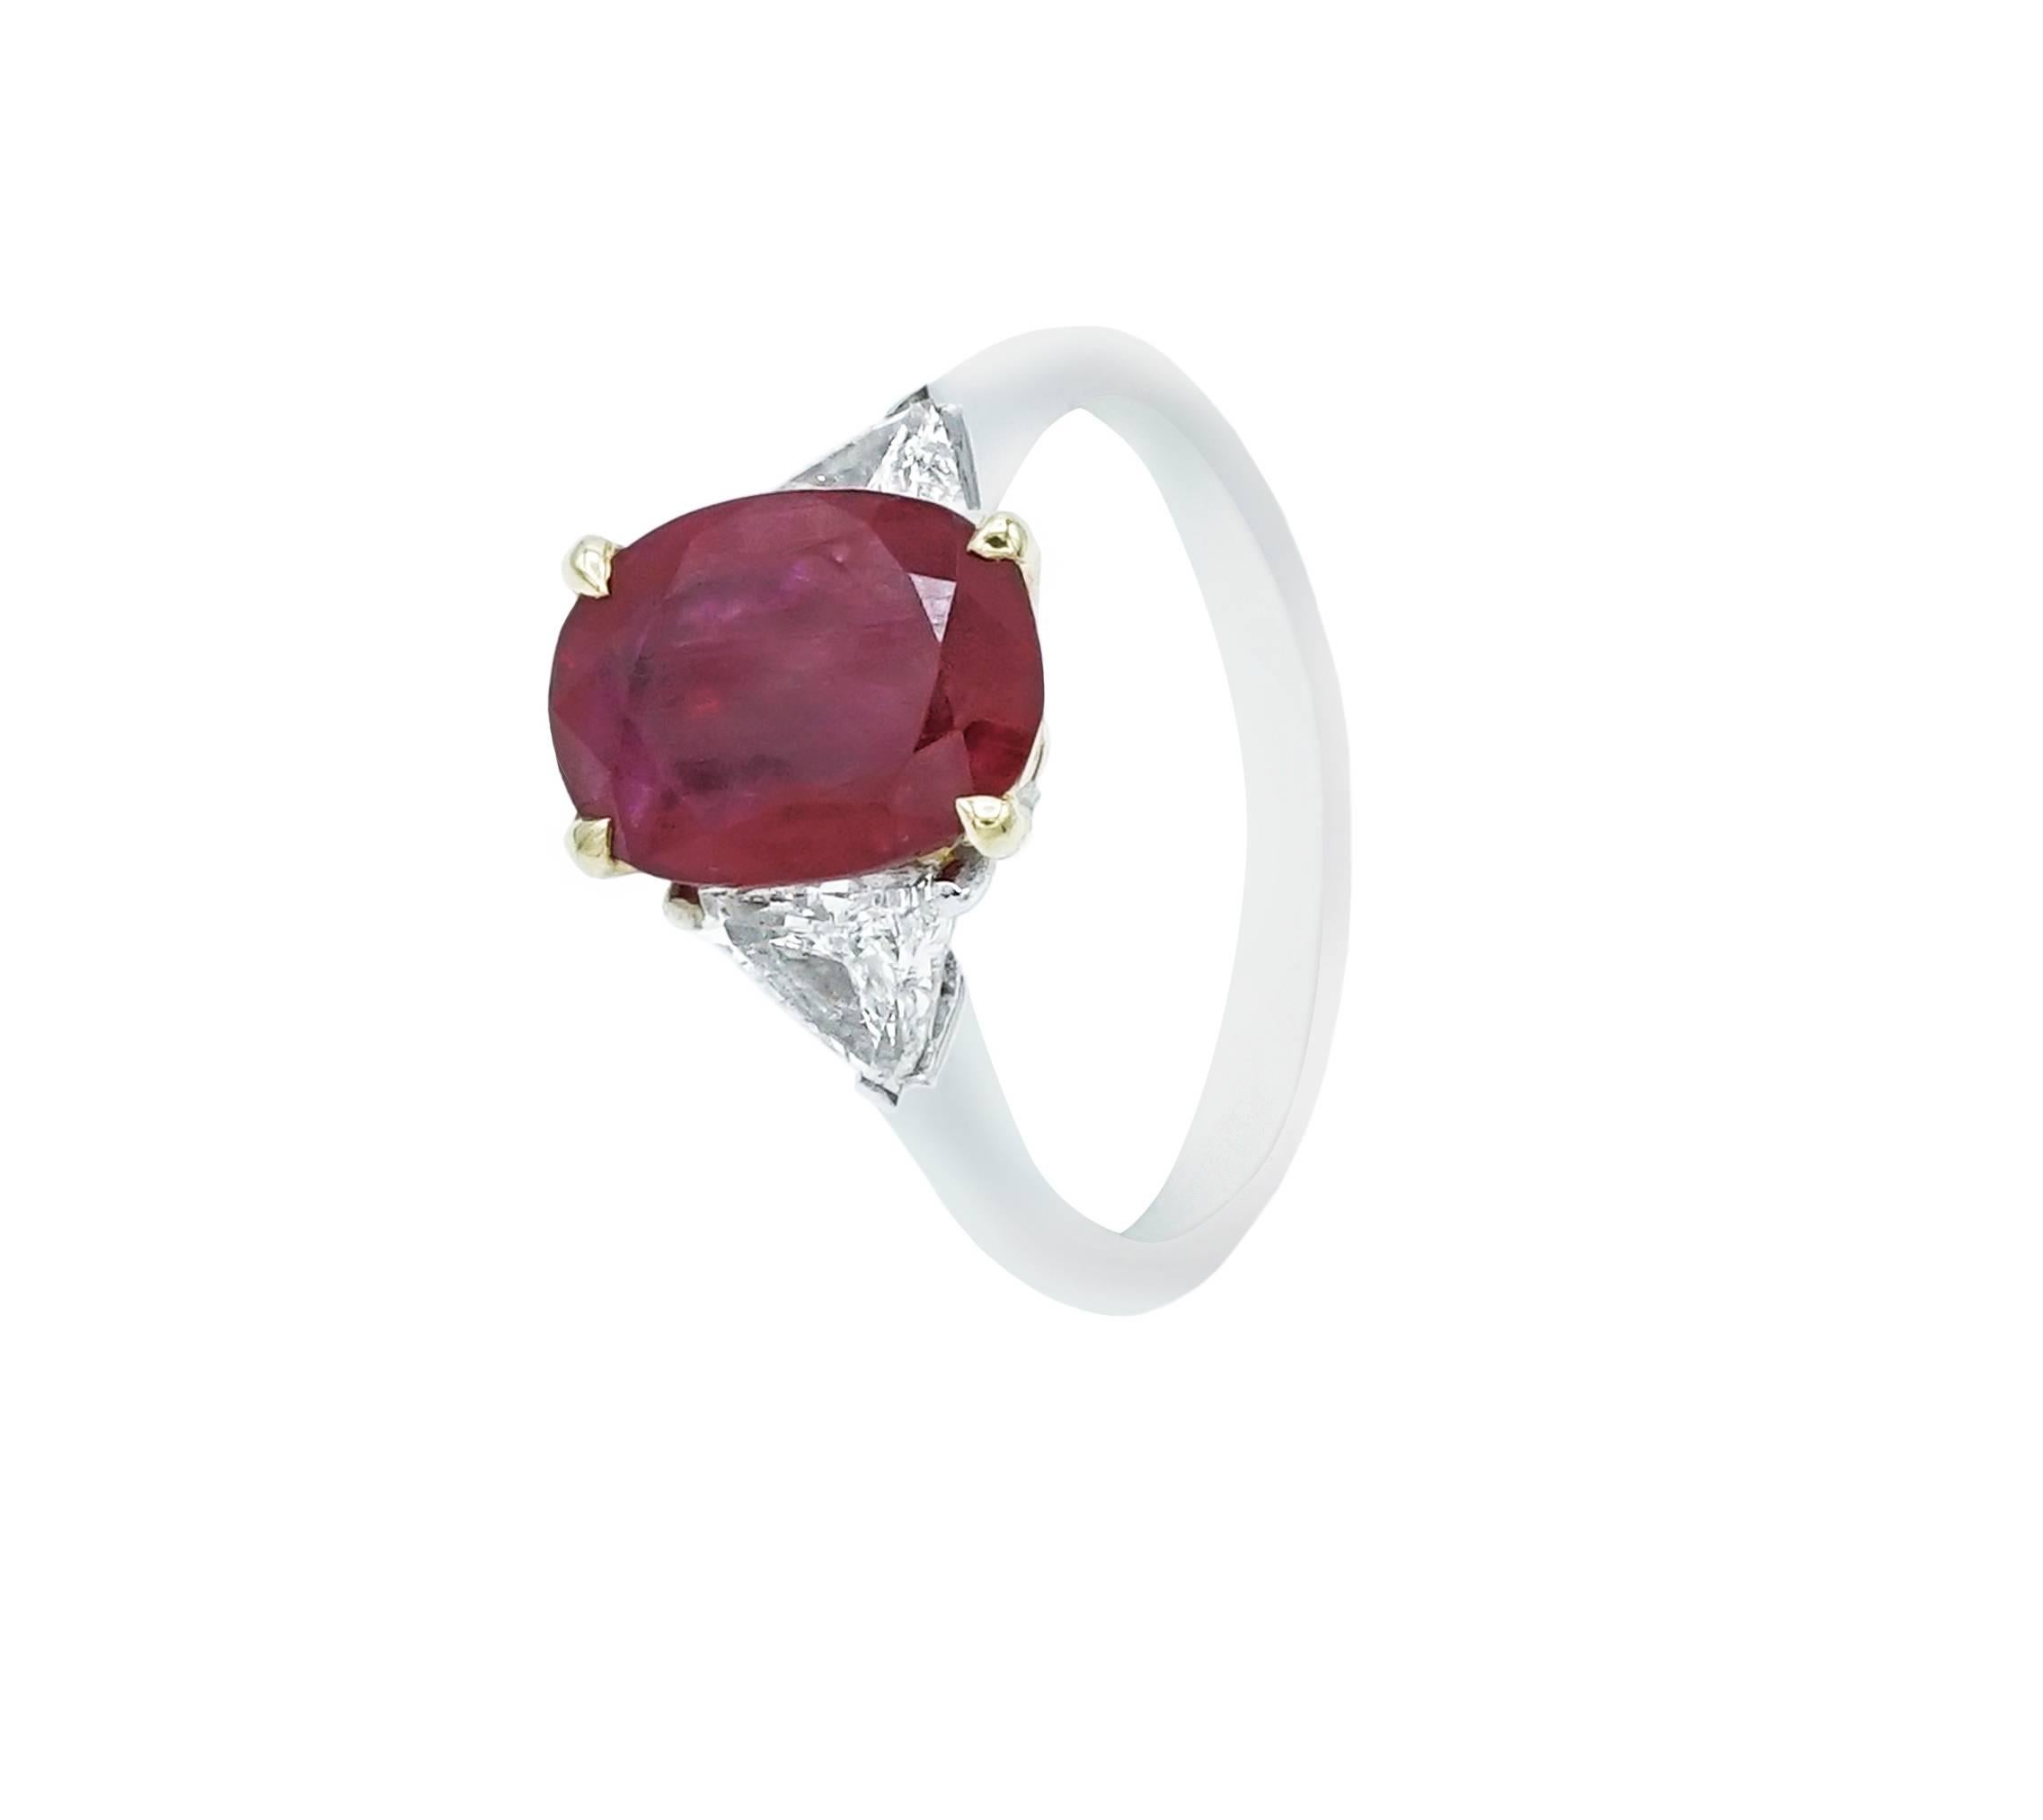 Ring in white and yellow gold set with a 3,10 carats ruby not heated with two triangle diamonds on its side.
SSEF Certificate. 
Ring size (French Size) : 54
(4,6 grs)